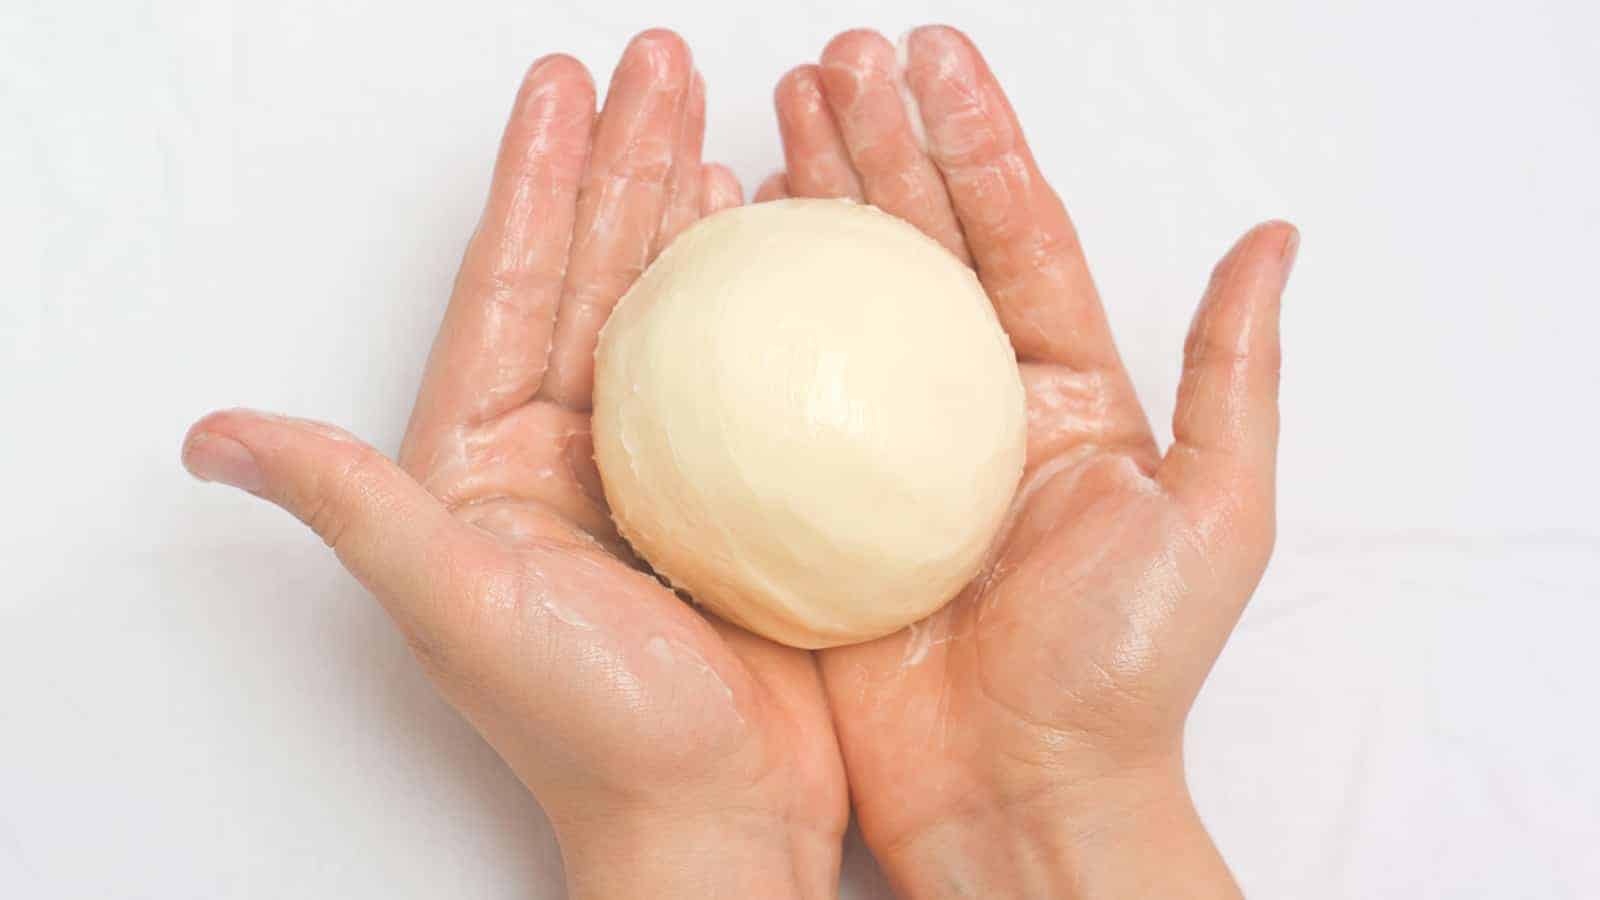 15 Things That Happen When You Use Shea Butter On Your Skin Every Day